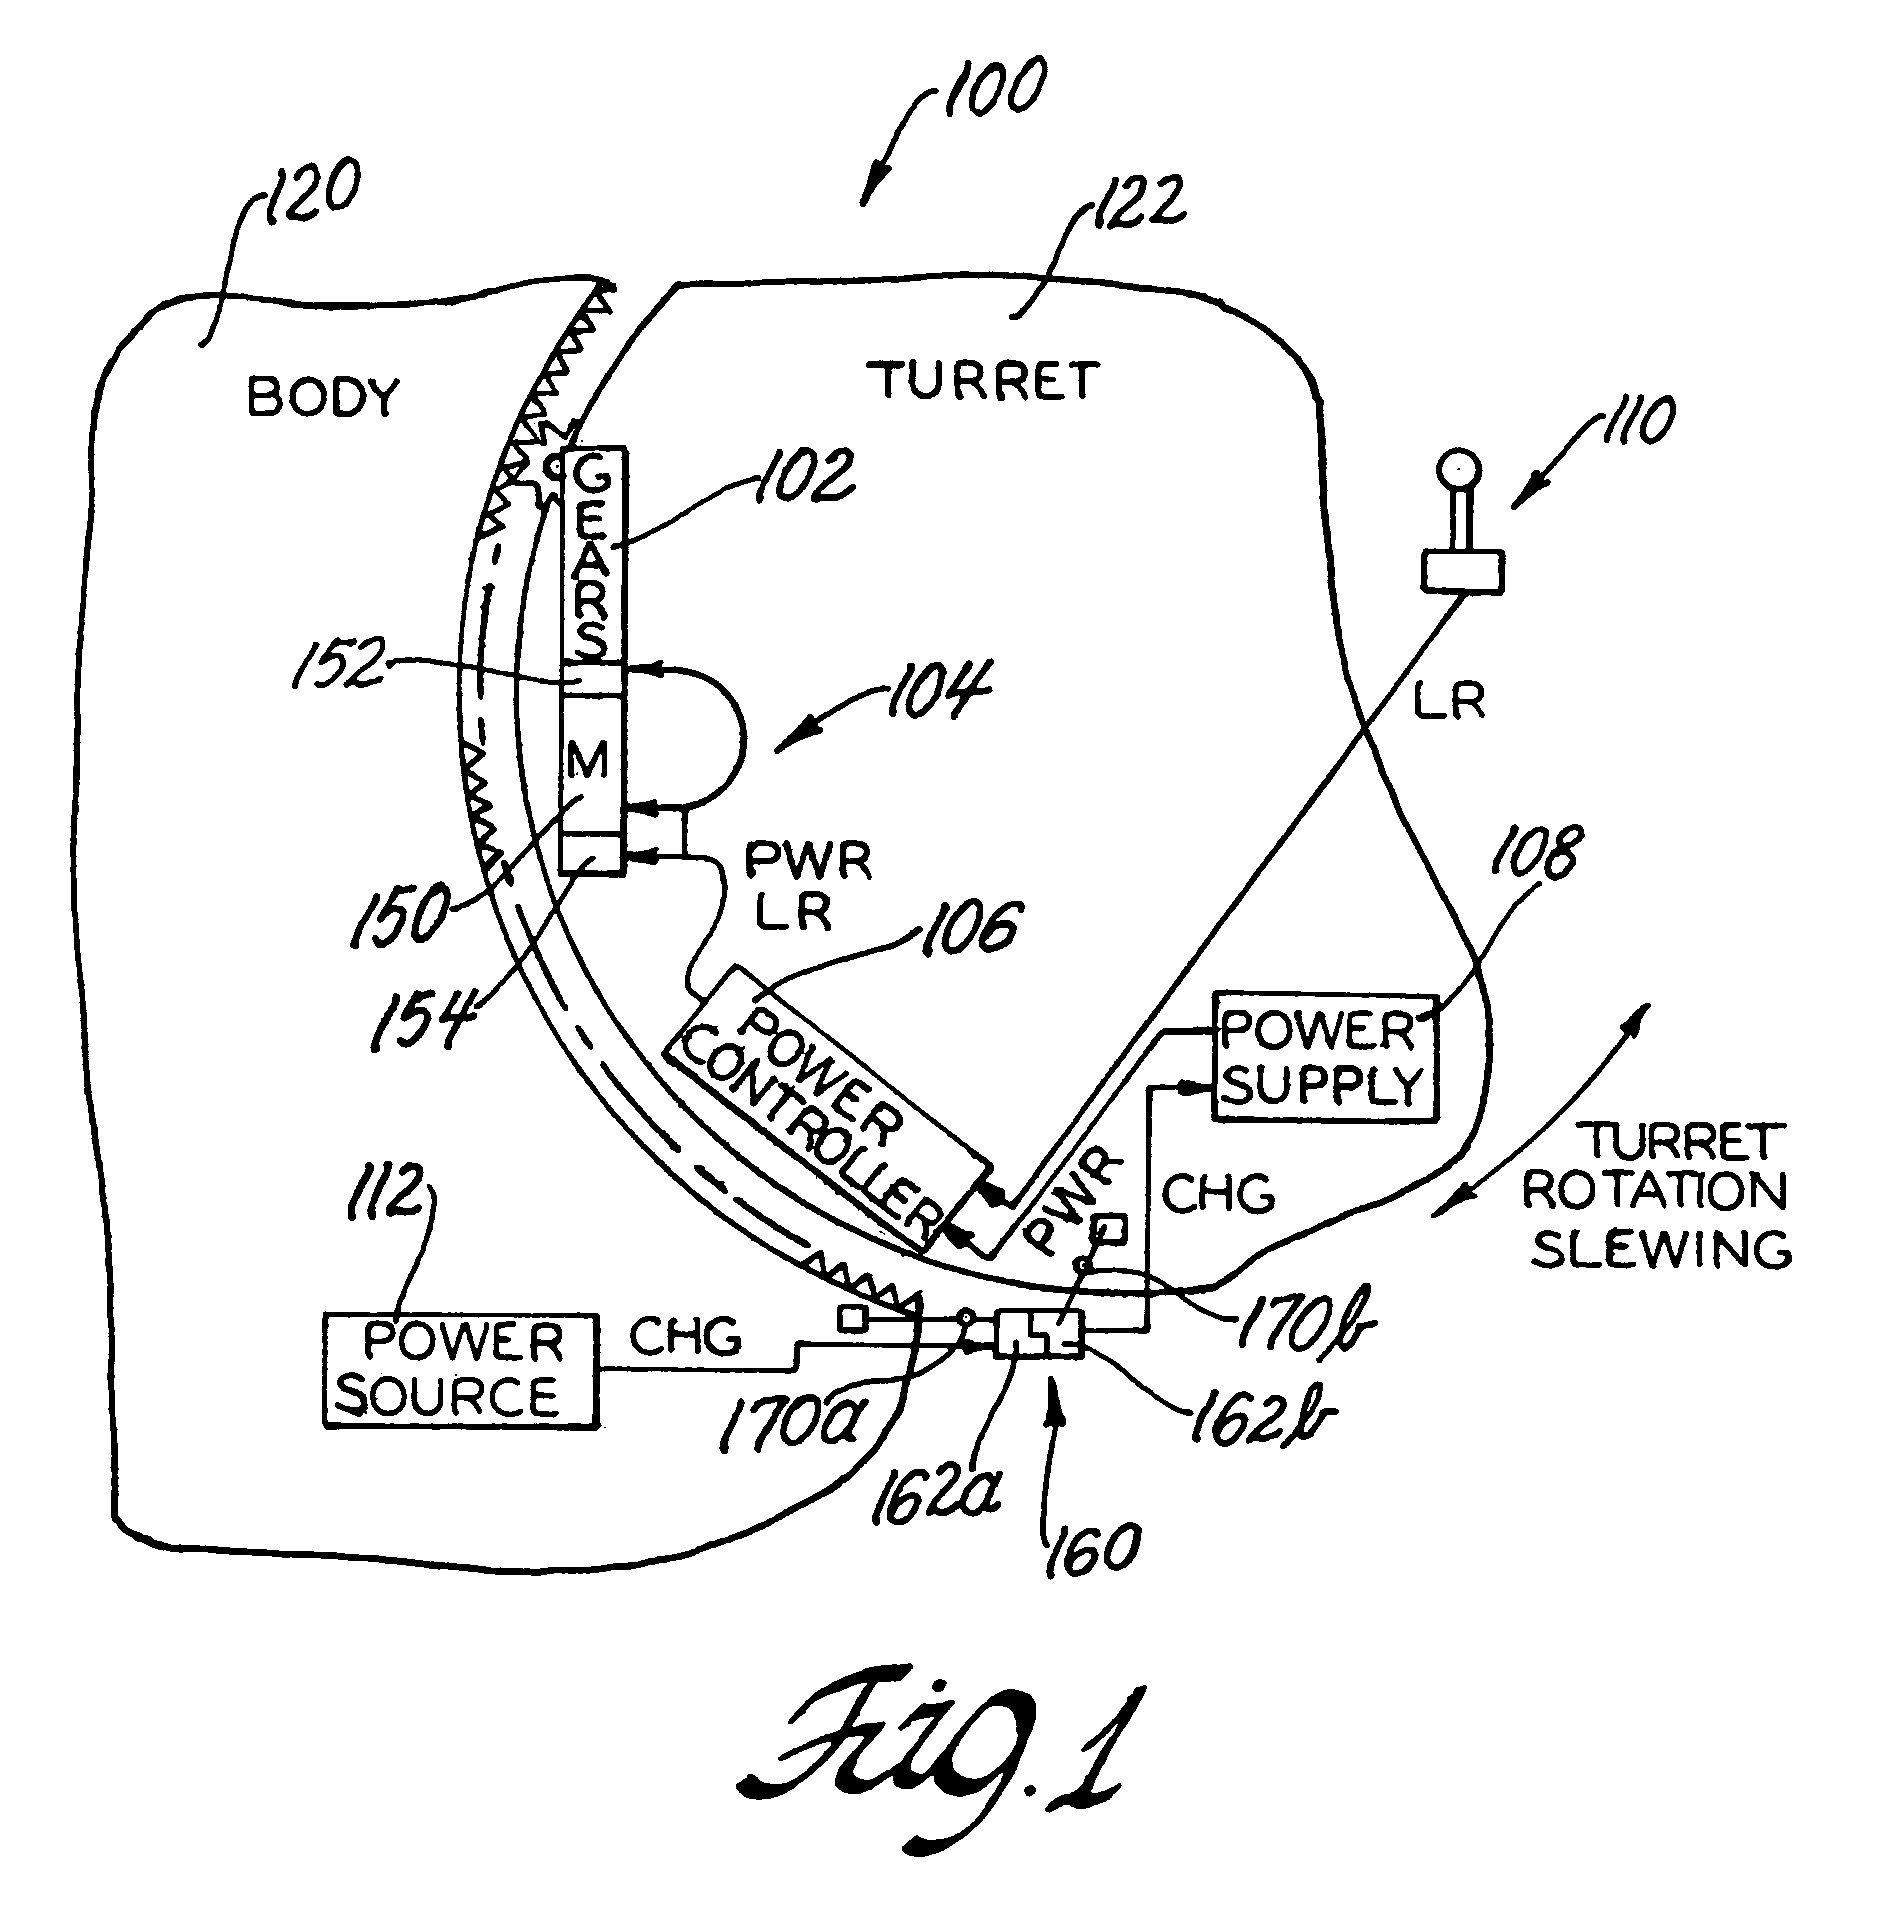 System and method for retrofit mechanism for motorizing a manual turret